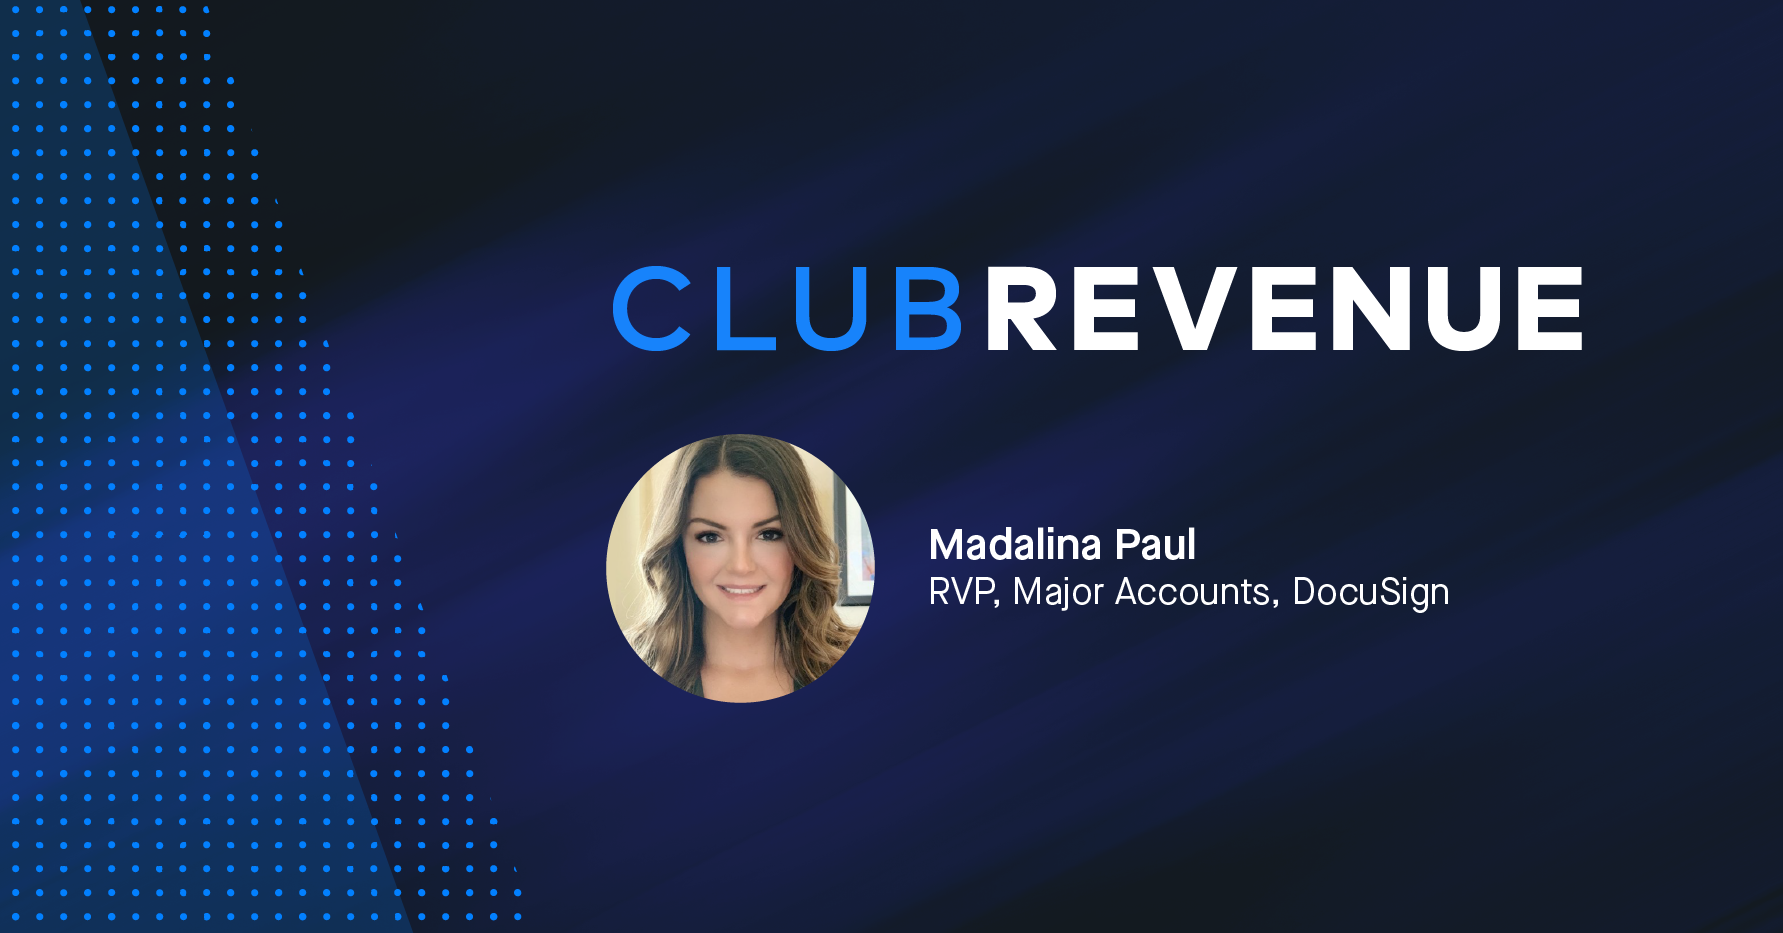 Banner for Club Revenue featuring headshot of Madaline Paul, RVP of Major Accounts at DocuSign